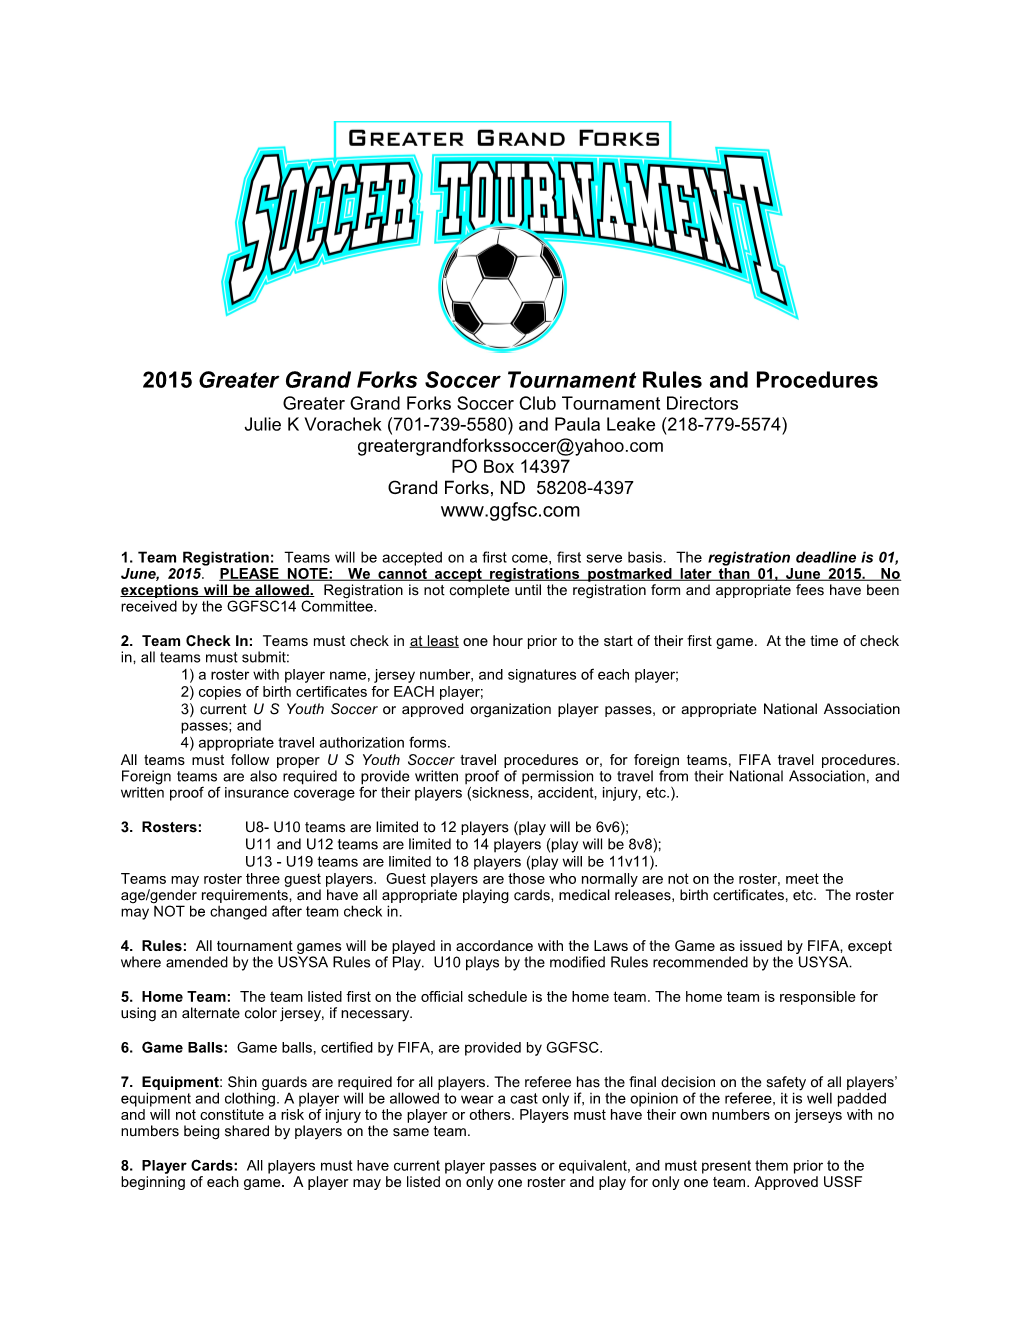 2008 Grand Cities Soccer Tournament Rules and Procedures